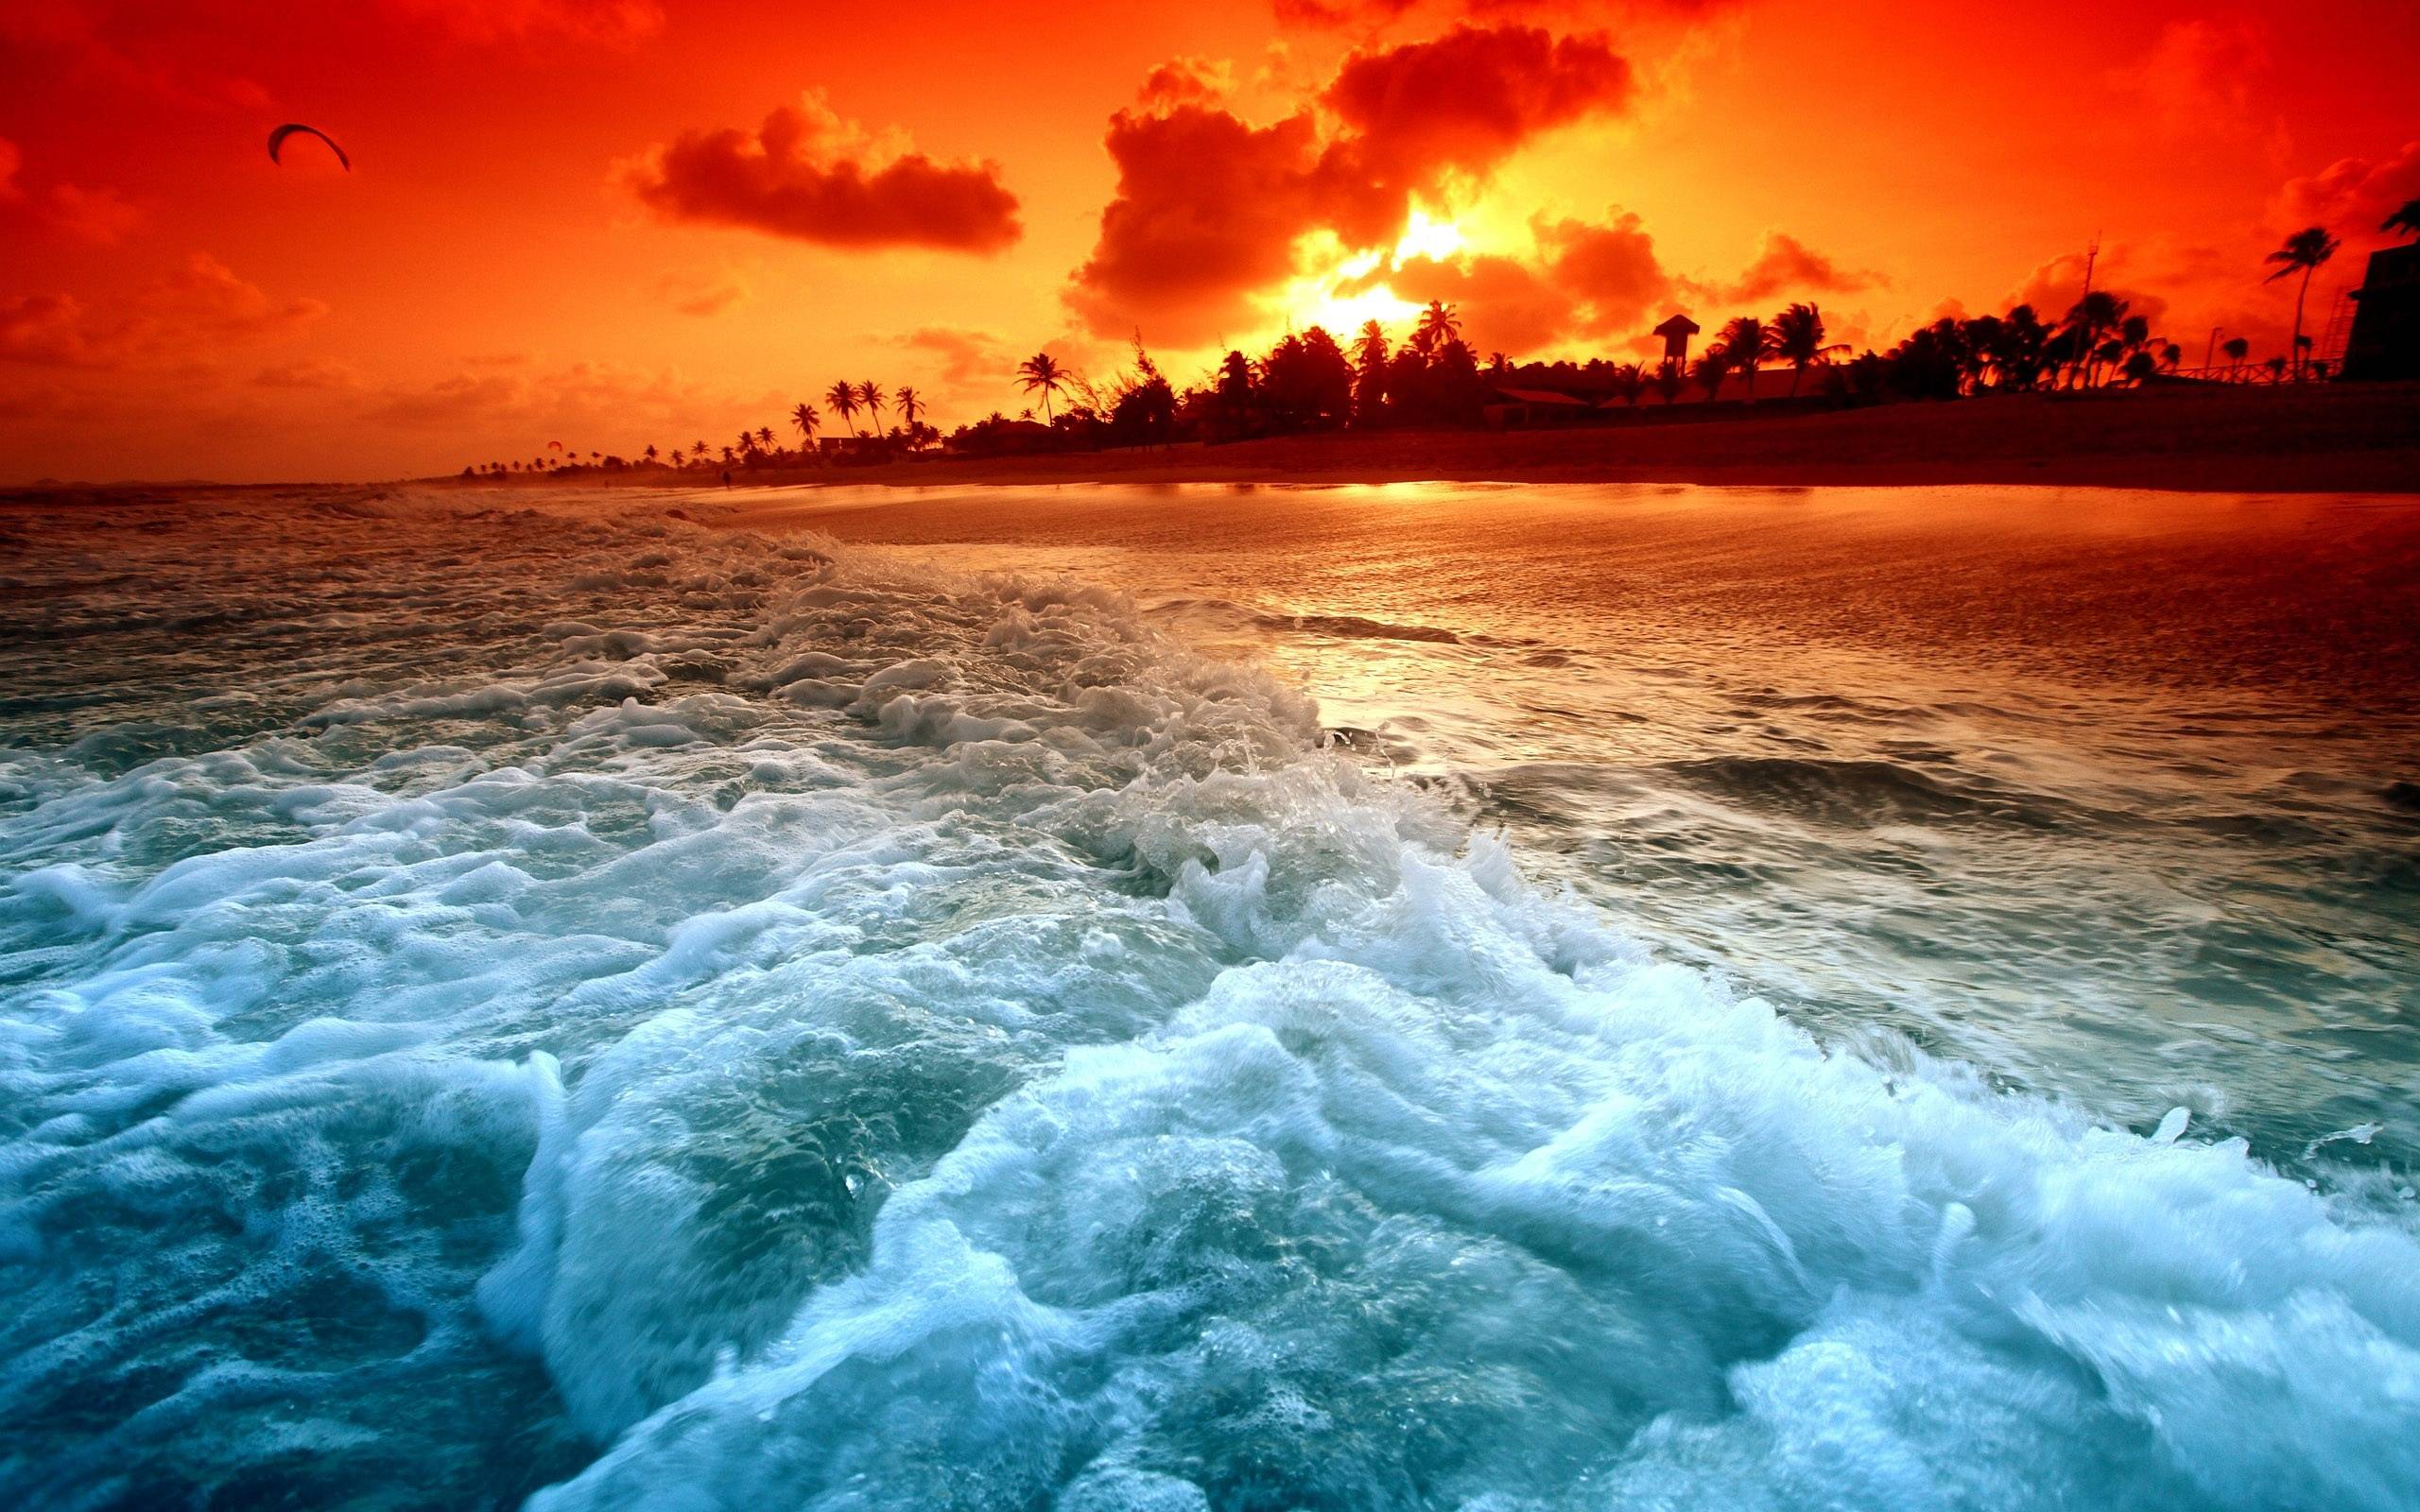 Hd Ocean Sunset Photography Wallpapers